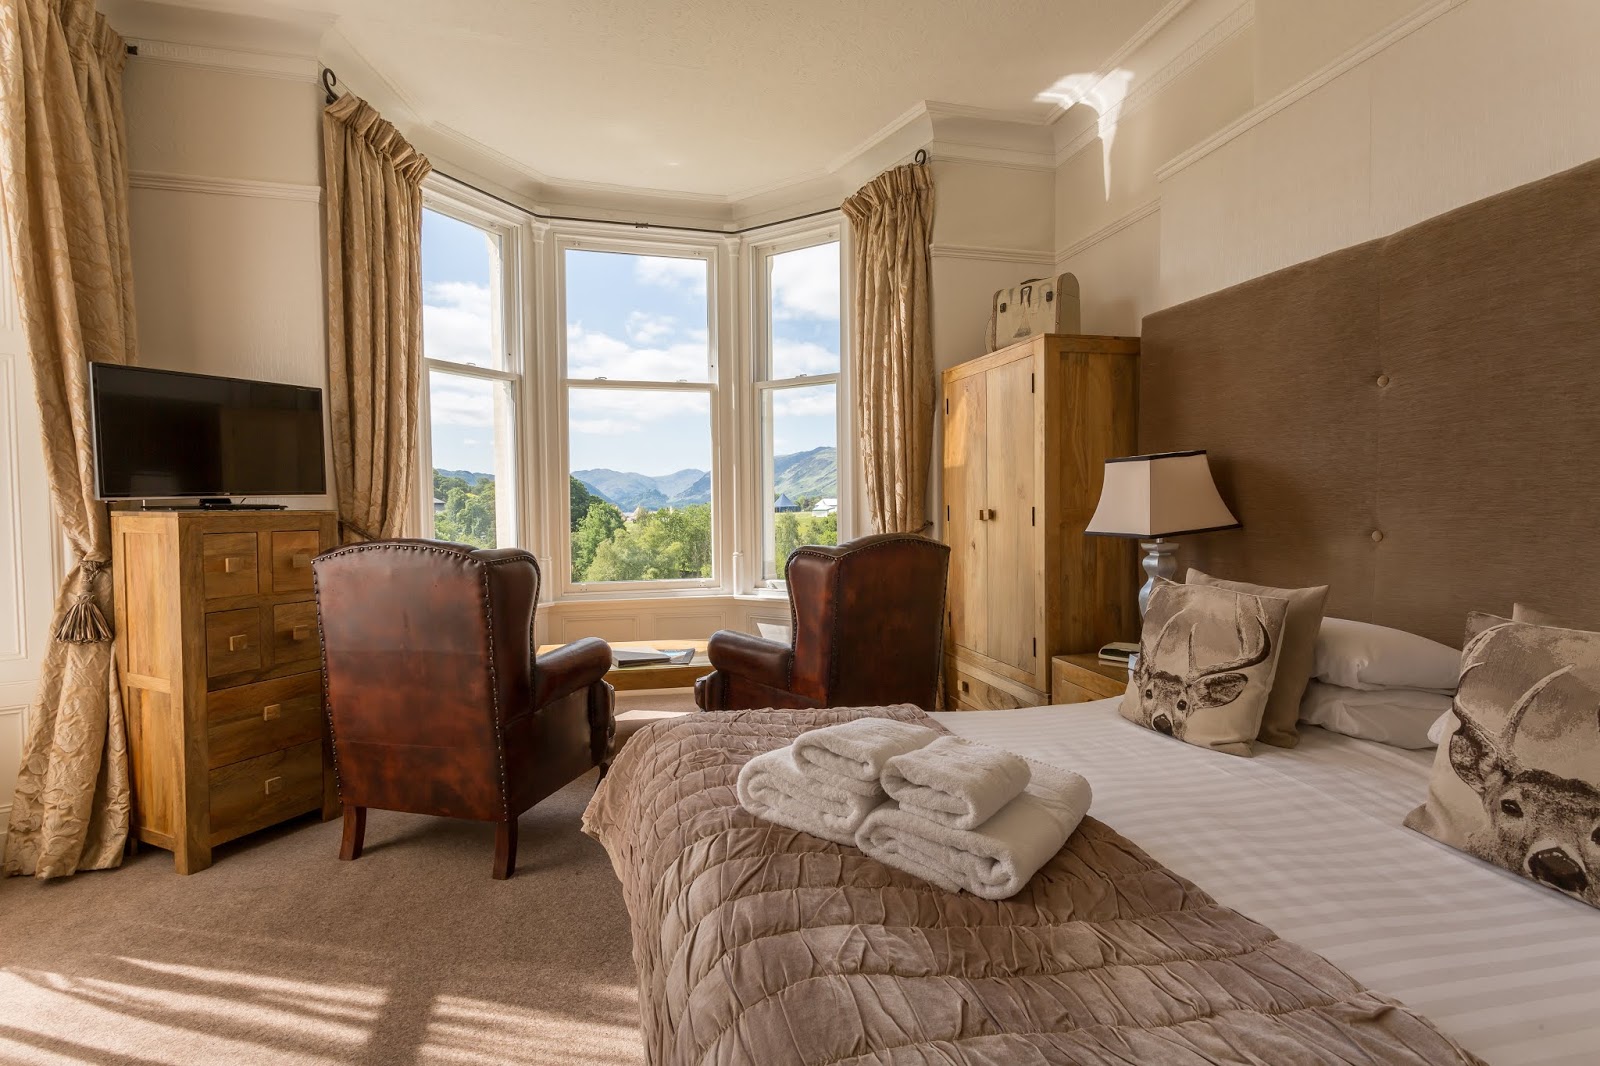 Hotel Review: Highfield Hotel in Keswick, Lake district | The Hiking